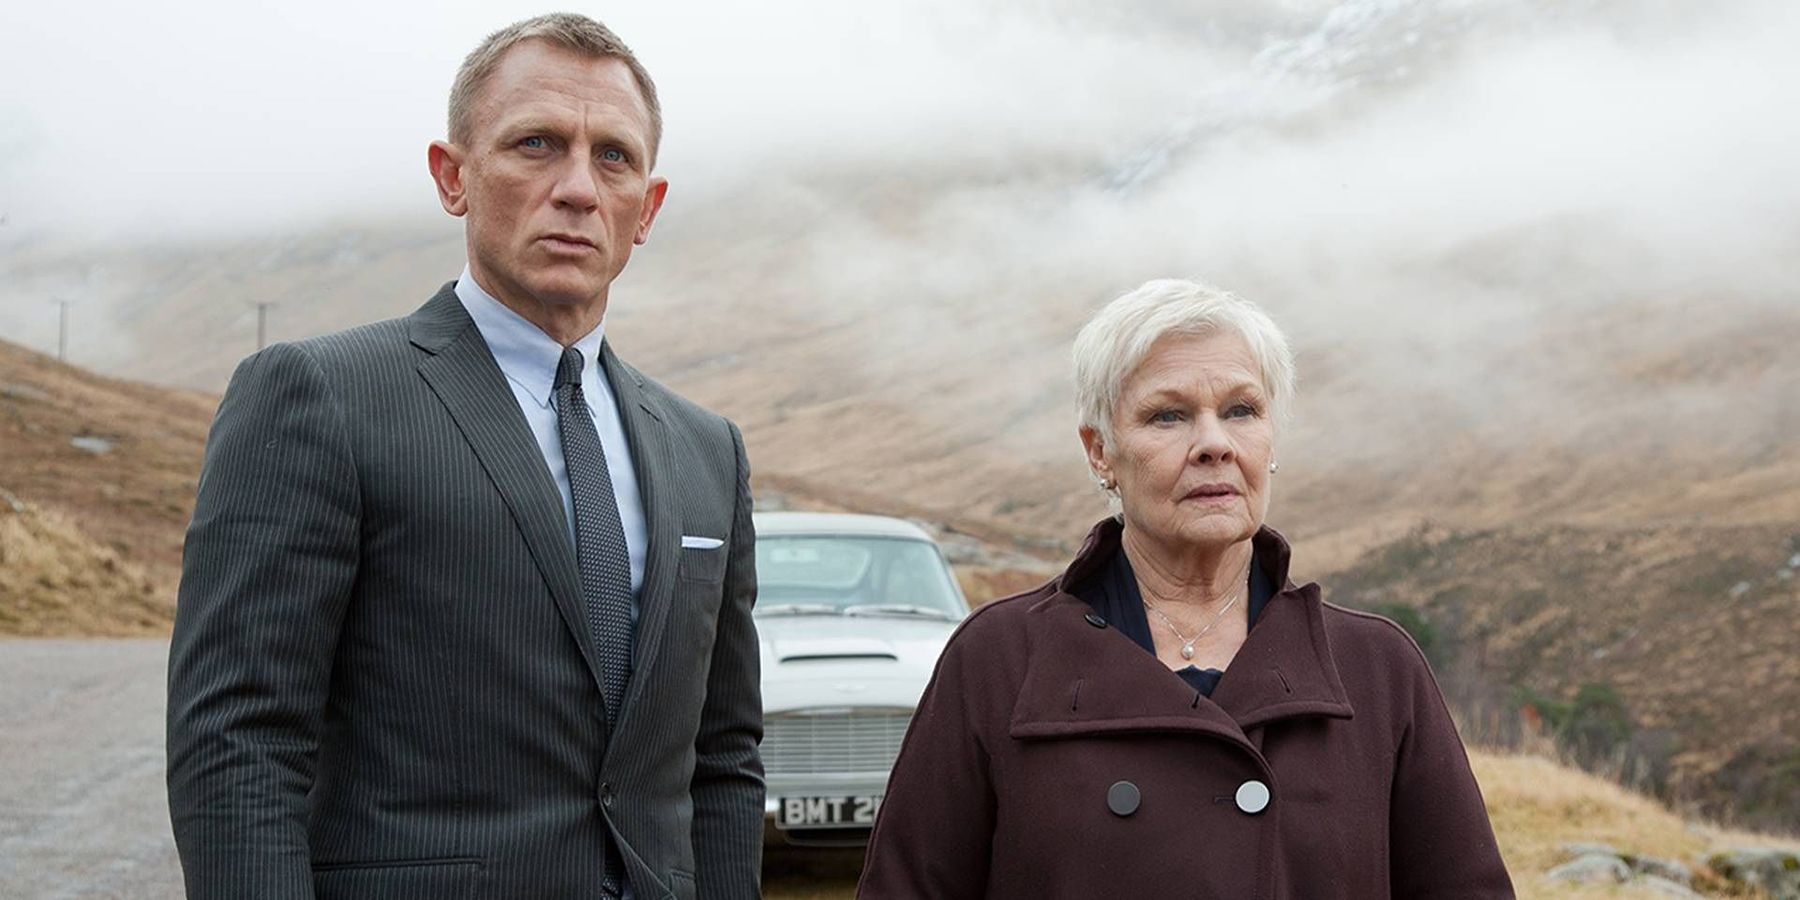 Daniel Craig's Run As 007 Will Go Down As One Of The Best Of All Time